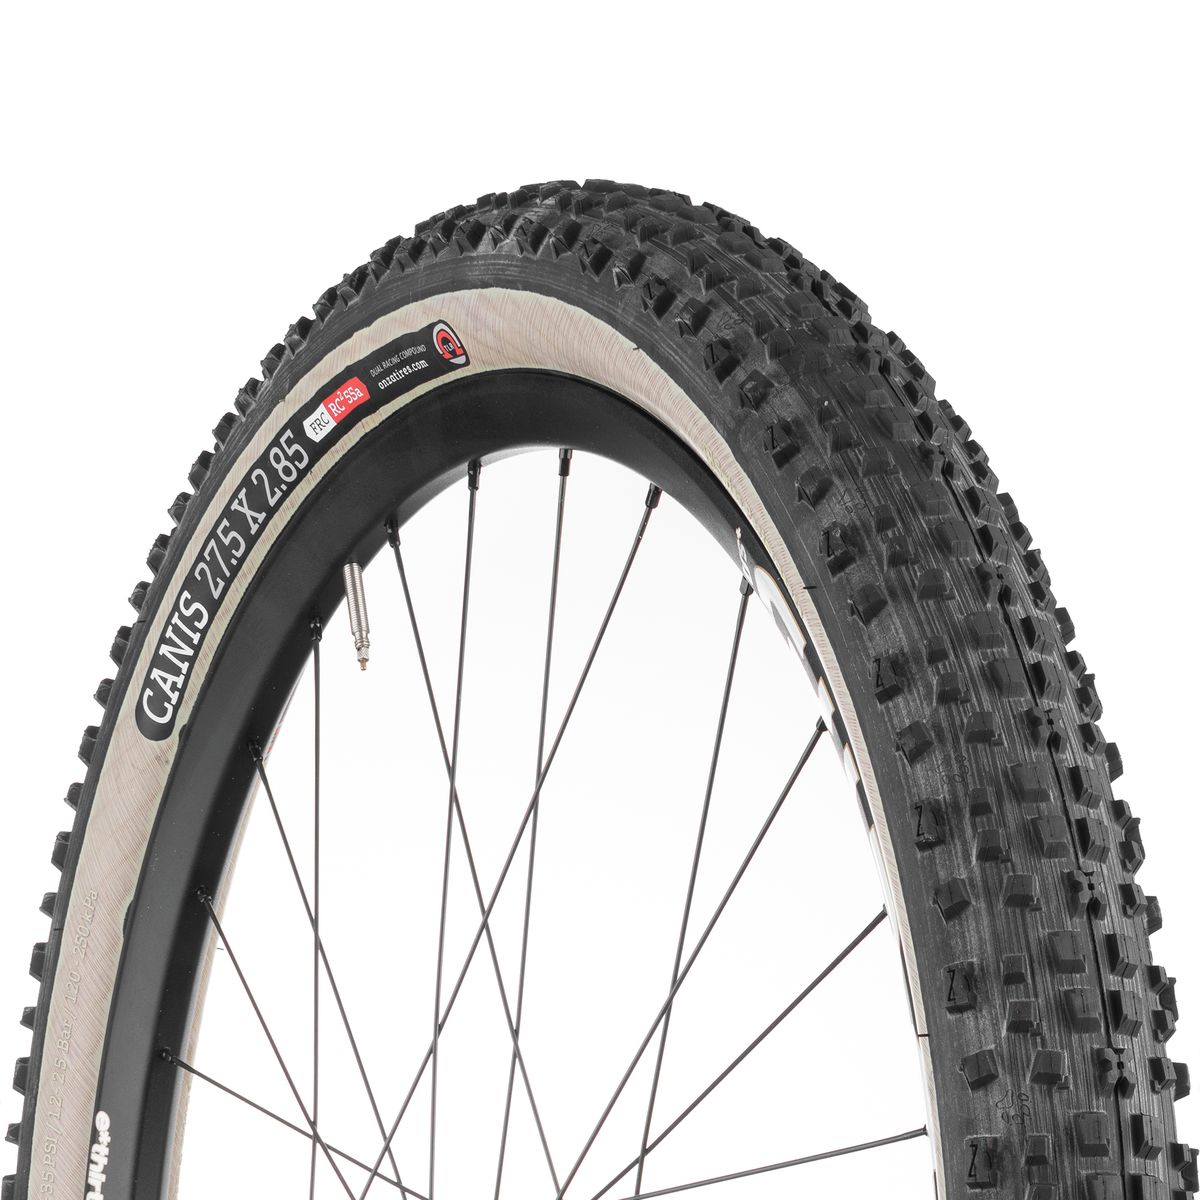 Onza Canis Gumwall Tubeless Tire - 27.5 Plus